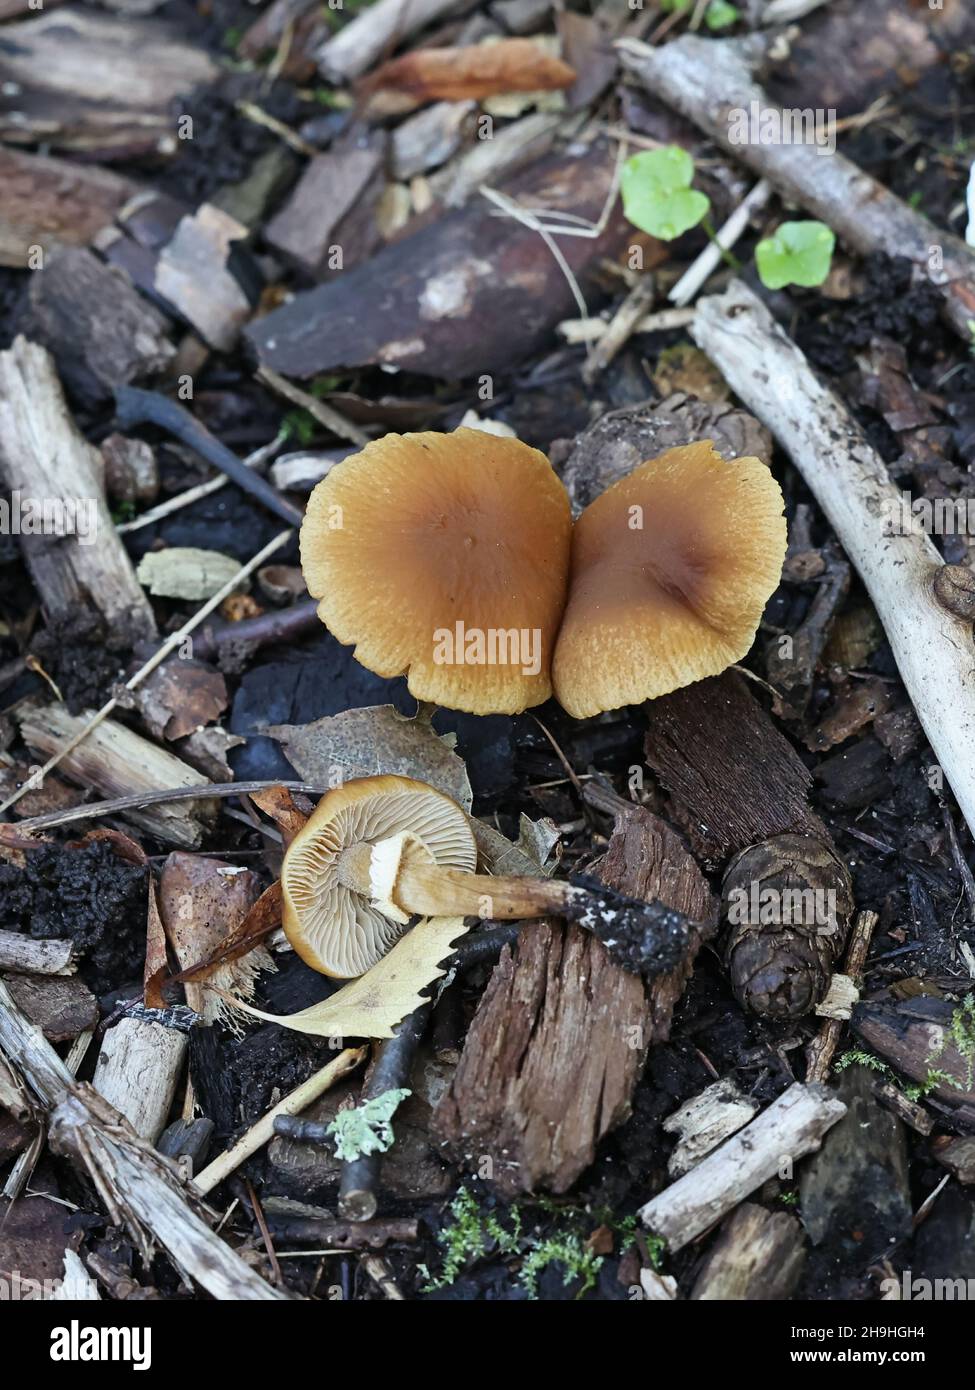 Cyclocybe erebia, also called Agrocybe erebia, commonly known as dark fieldcap, wild mushroom from Finland Stock Photo